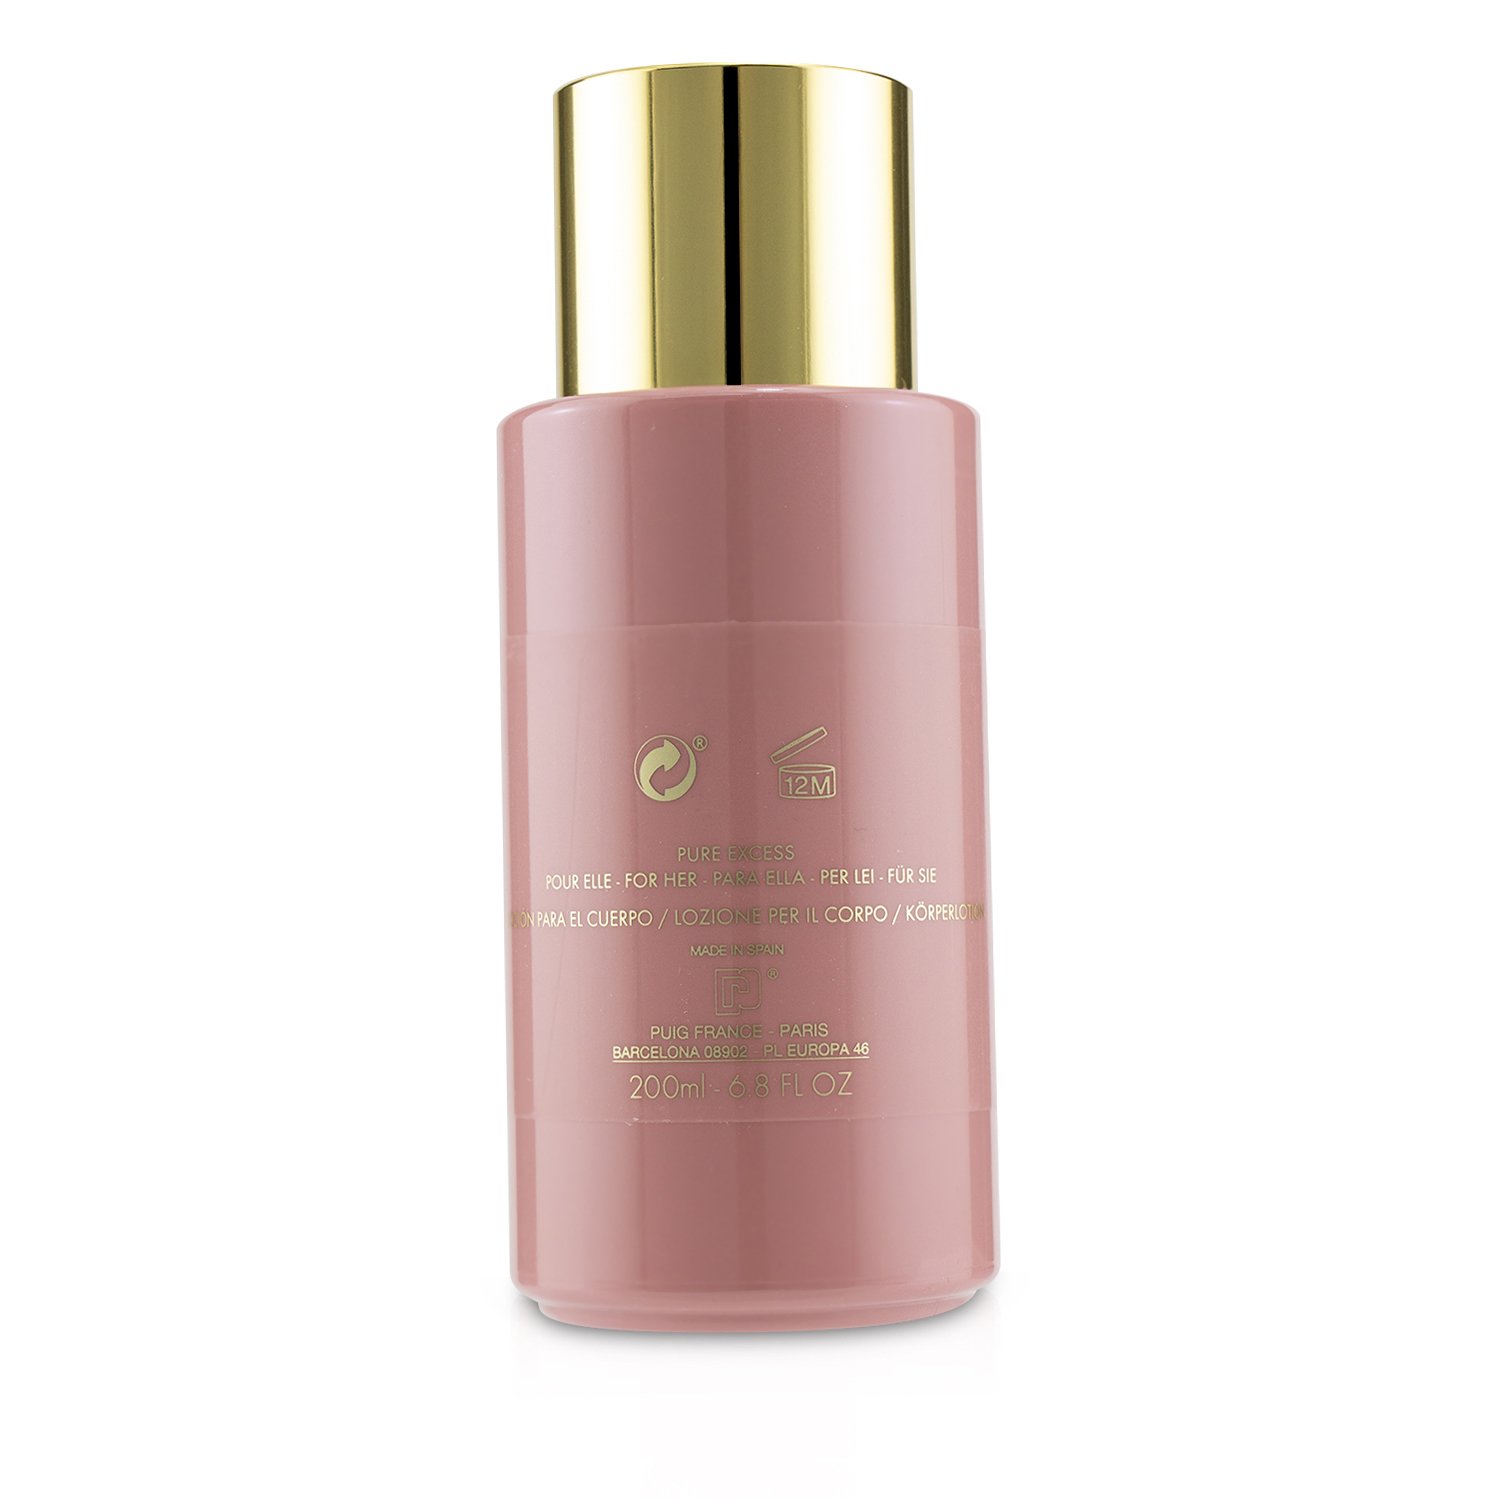 Paco Rabanne Pure XS for Her Sensual Body Lotion 200ml/6.8oz